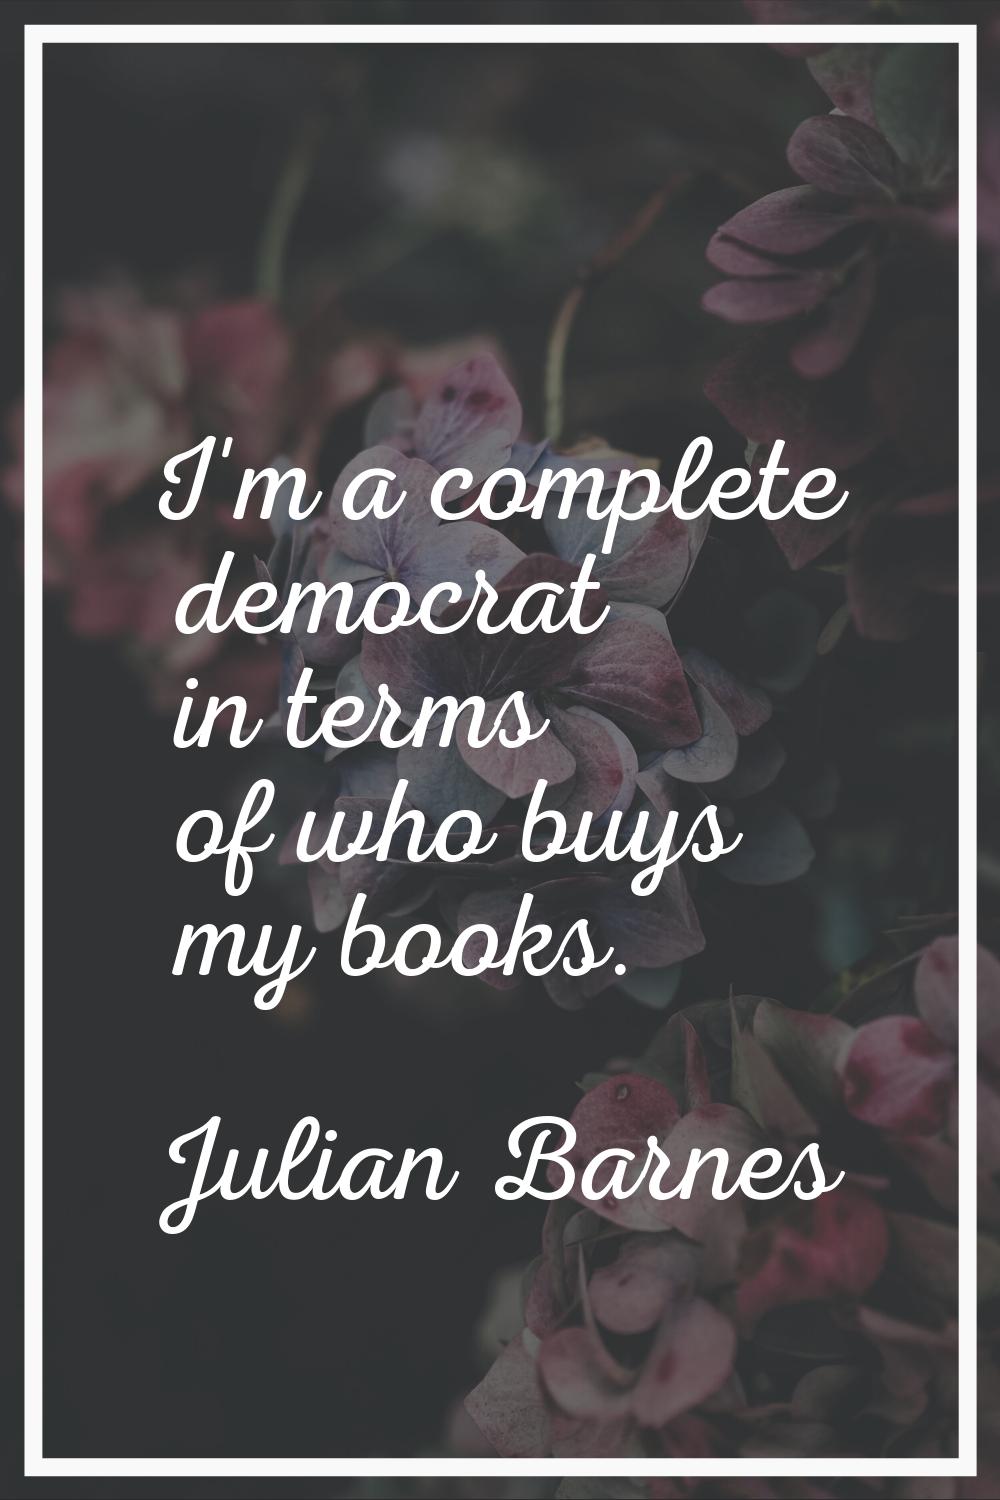 I'm a complete democrat in terms of who buys my books.